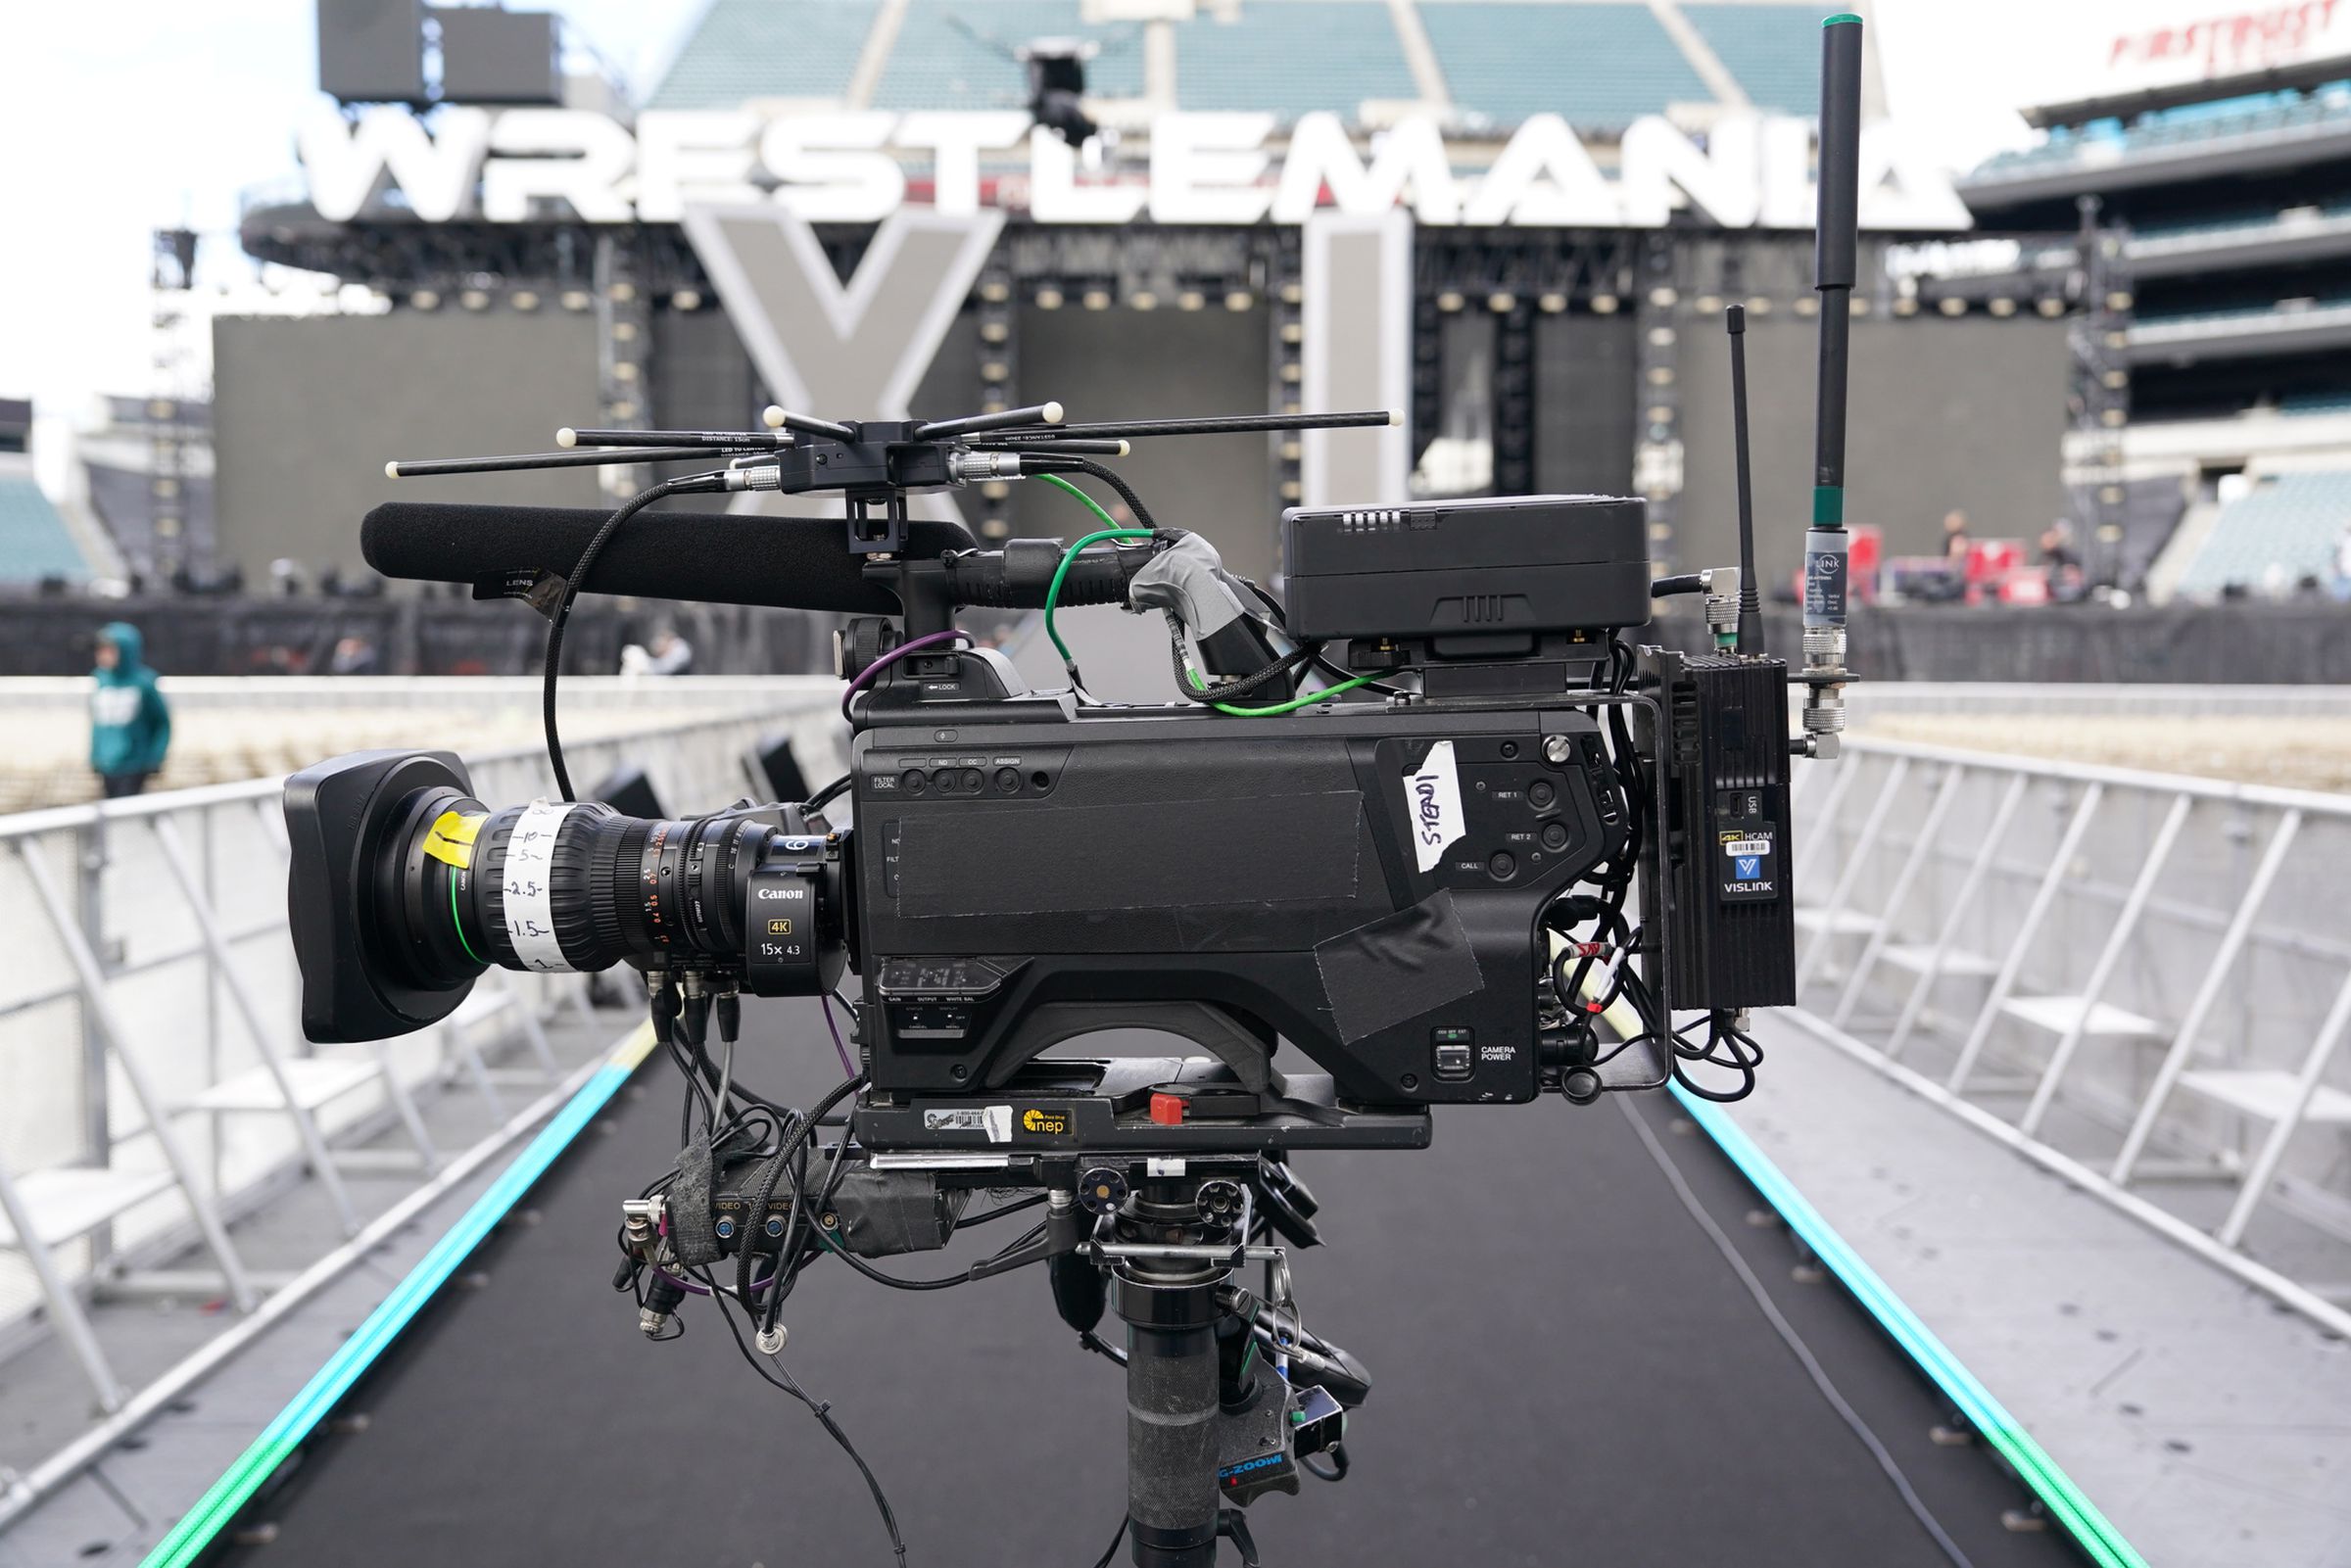 A photo of a camera used by WWE at WrestleMania 40.